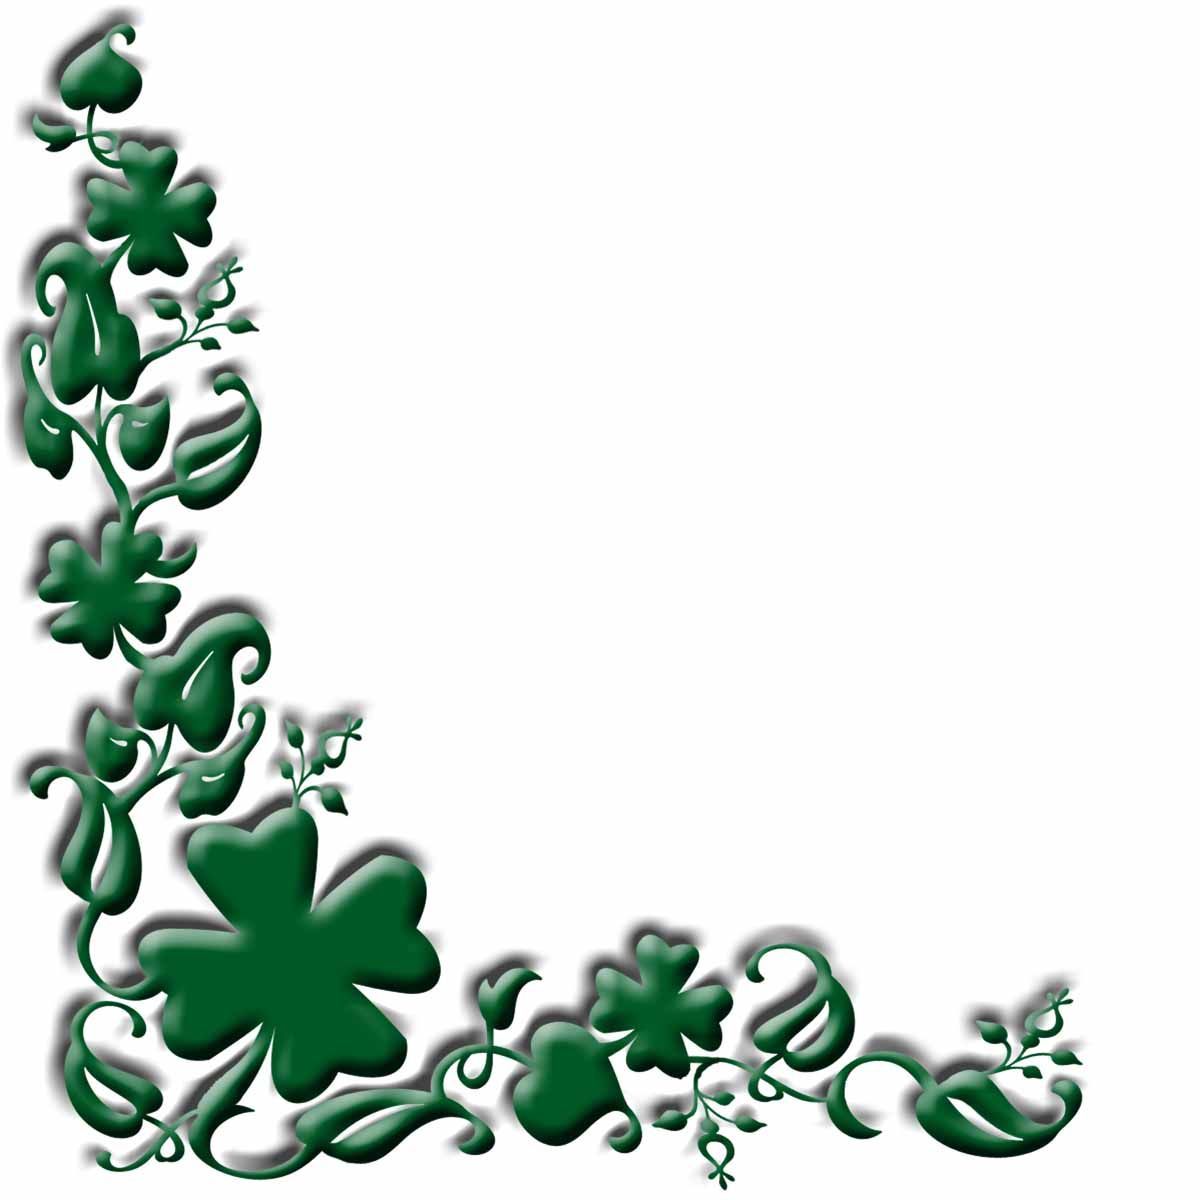 Four leaf clover clipart free image